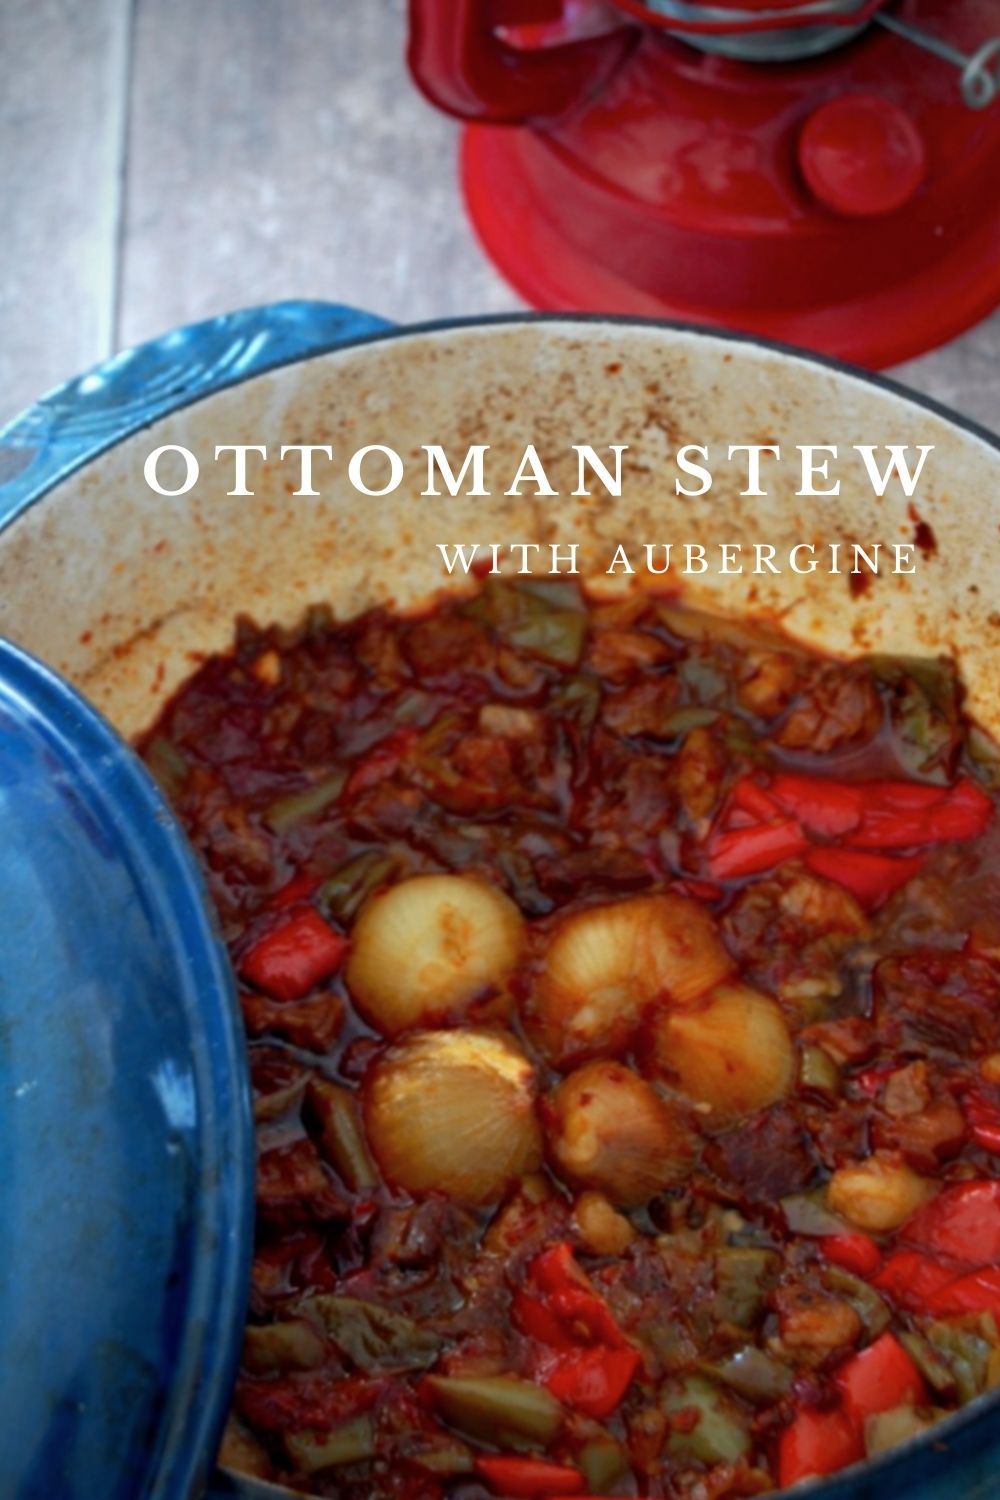 Pinable image slowing complete dish photo with text overlay: Ottoman Stew with aubergine.